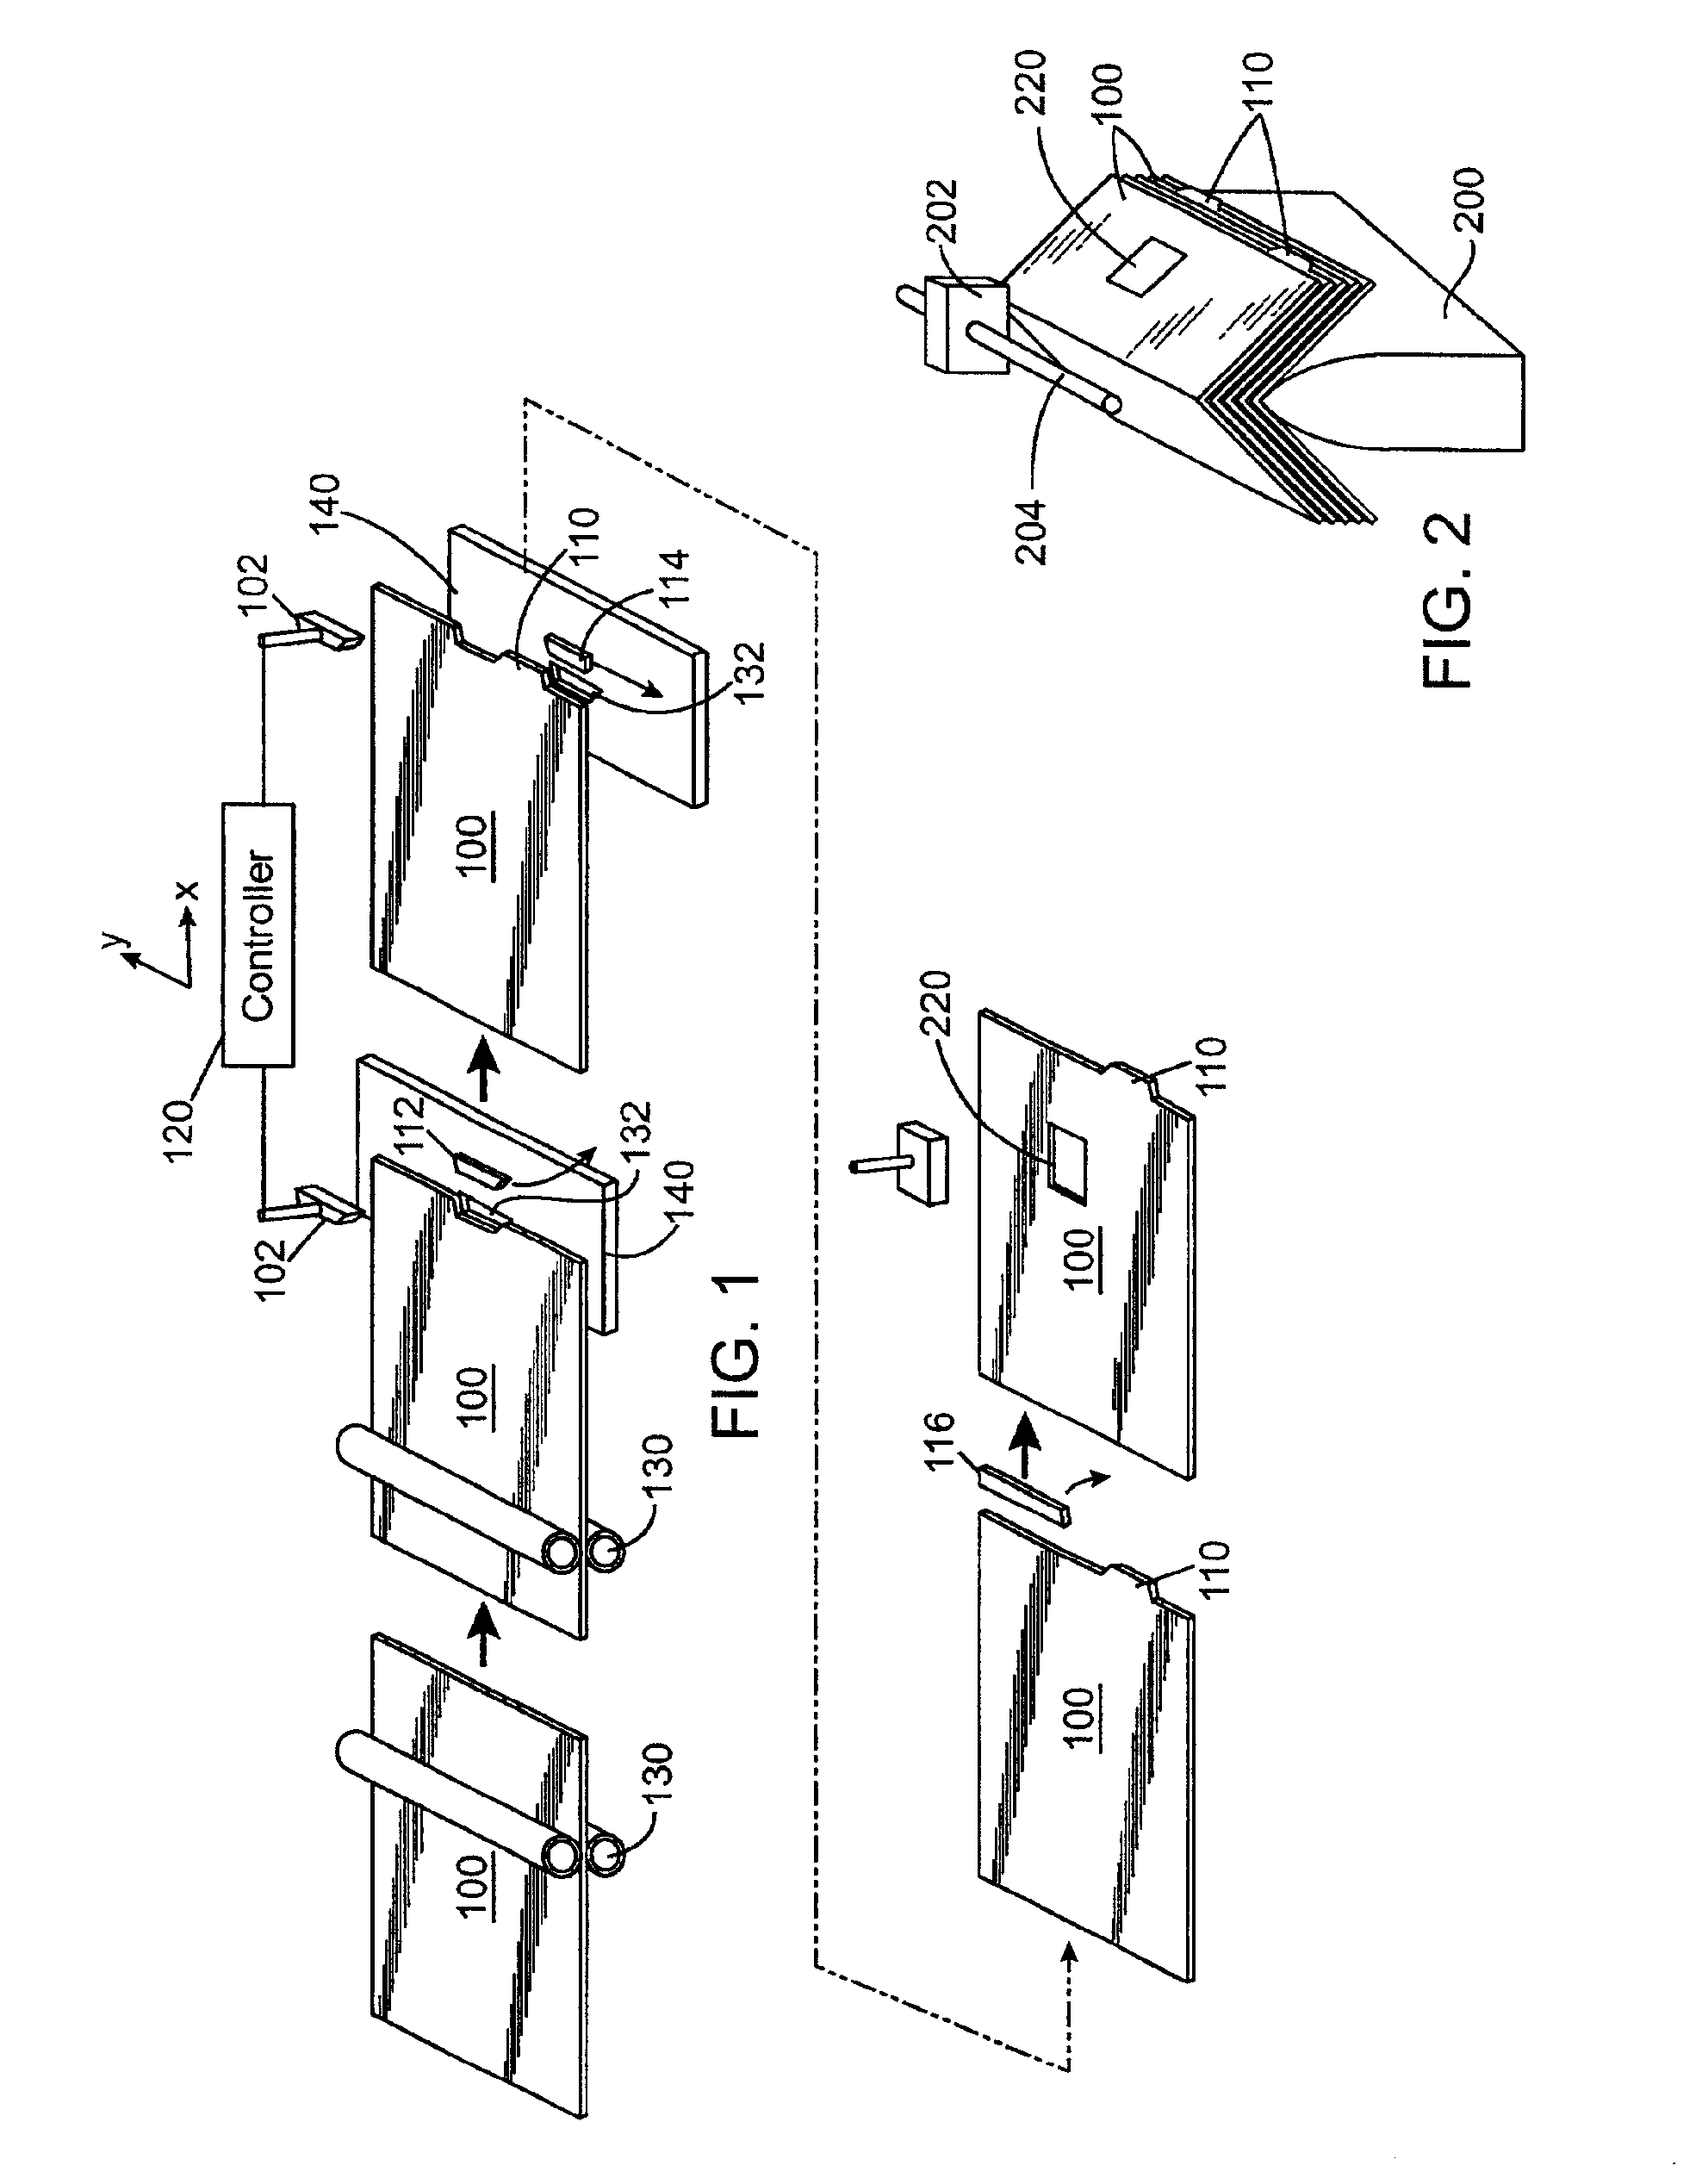 Binding system with sheet-wise formation of features